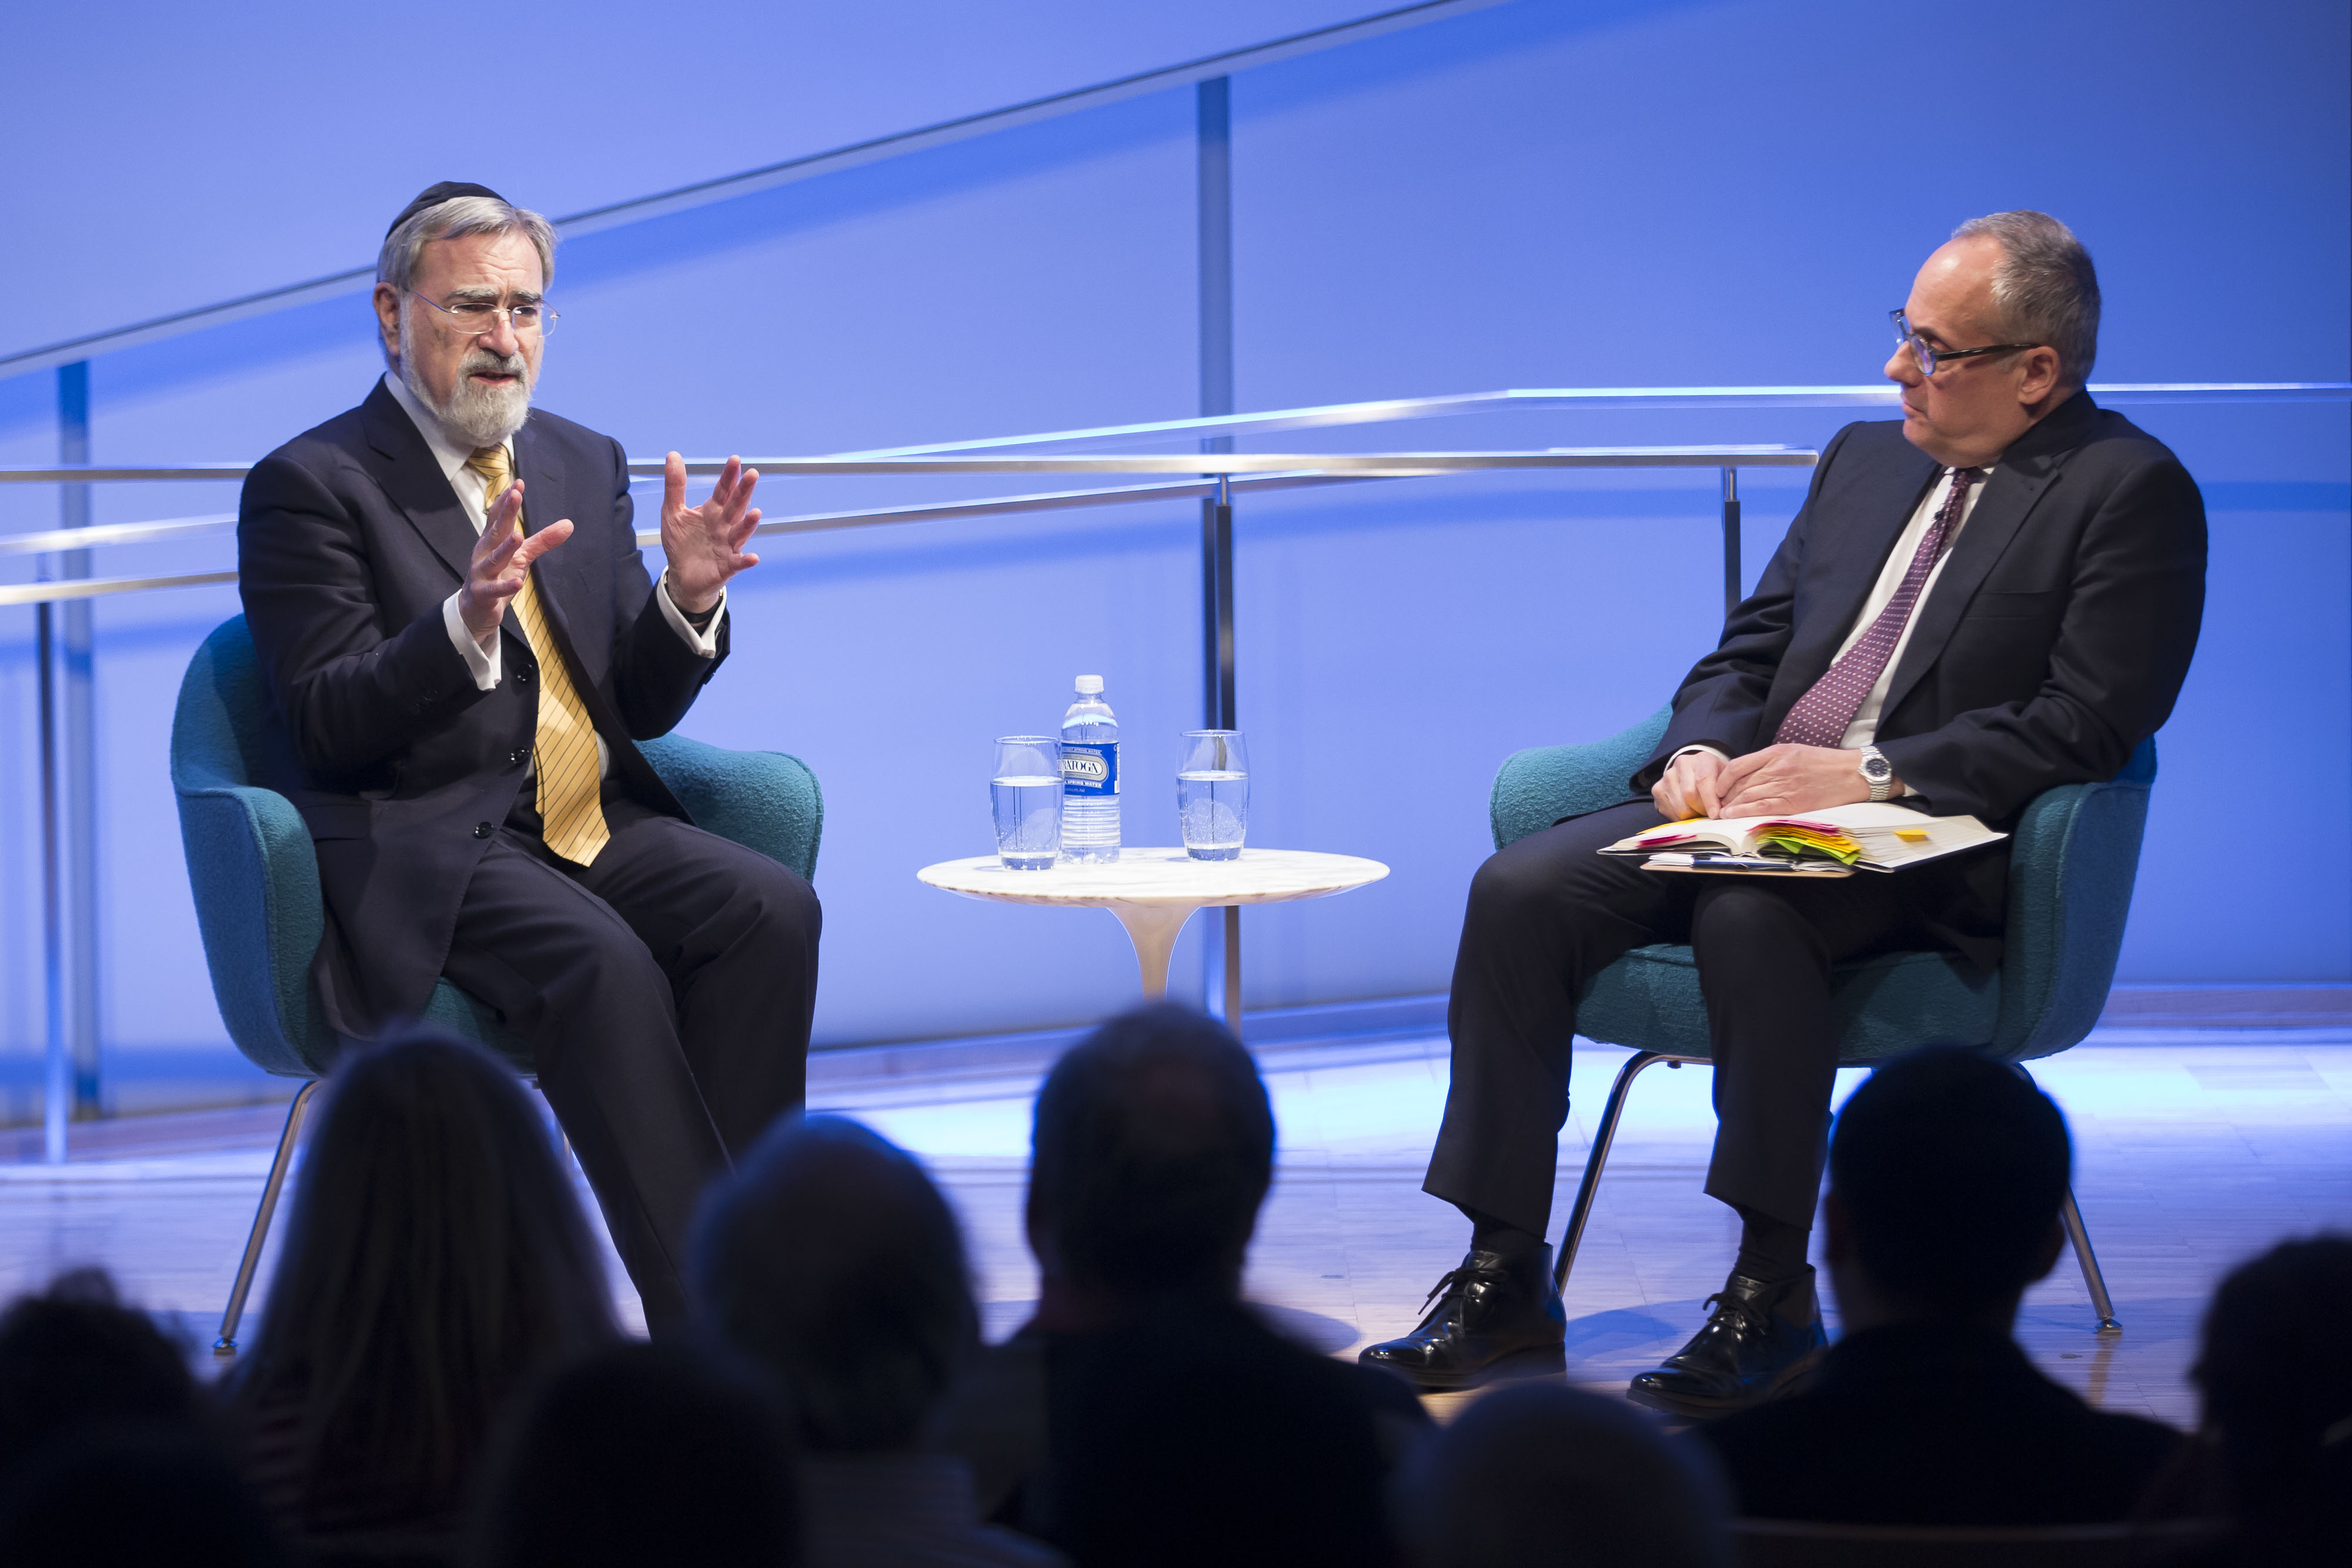 In this wide-angle shot, which shows audience members at the 9/11 Memorial Museum auditorium in in silhouette in the foreground,  the Rabbi Jonathan Sacks, who had retired as chief rabbi of the United Hebrew Congregations of the British Commonwealth when he visited in 2016, raises both his hands as he gestures in conversation with Cliff Chanin.